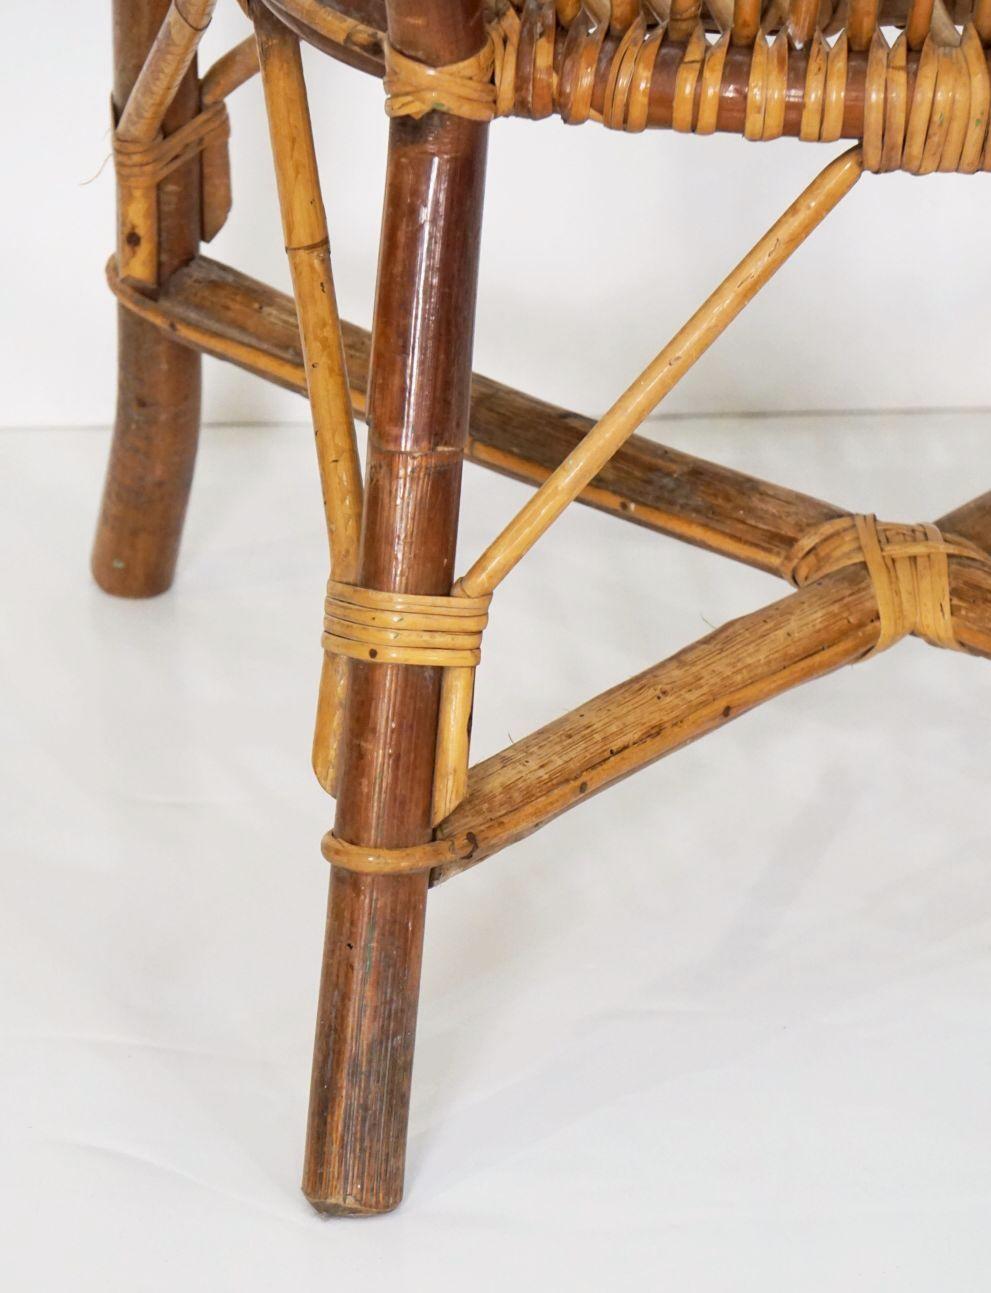 Italian Fan-Backed Arm Chairs of Rattan and Bamboo from the Mid-20th Century For Sale 9